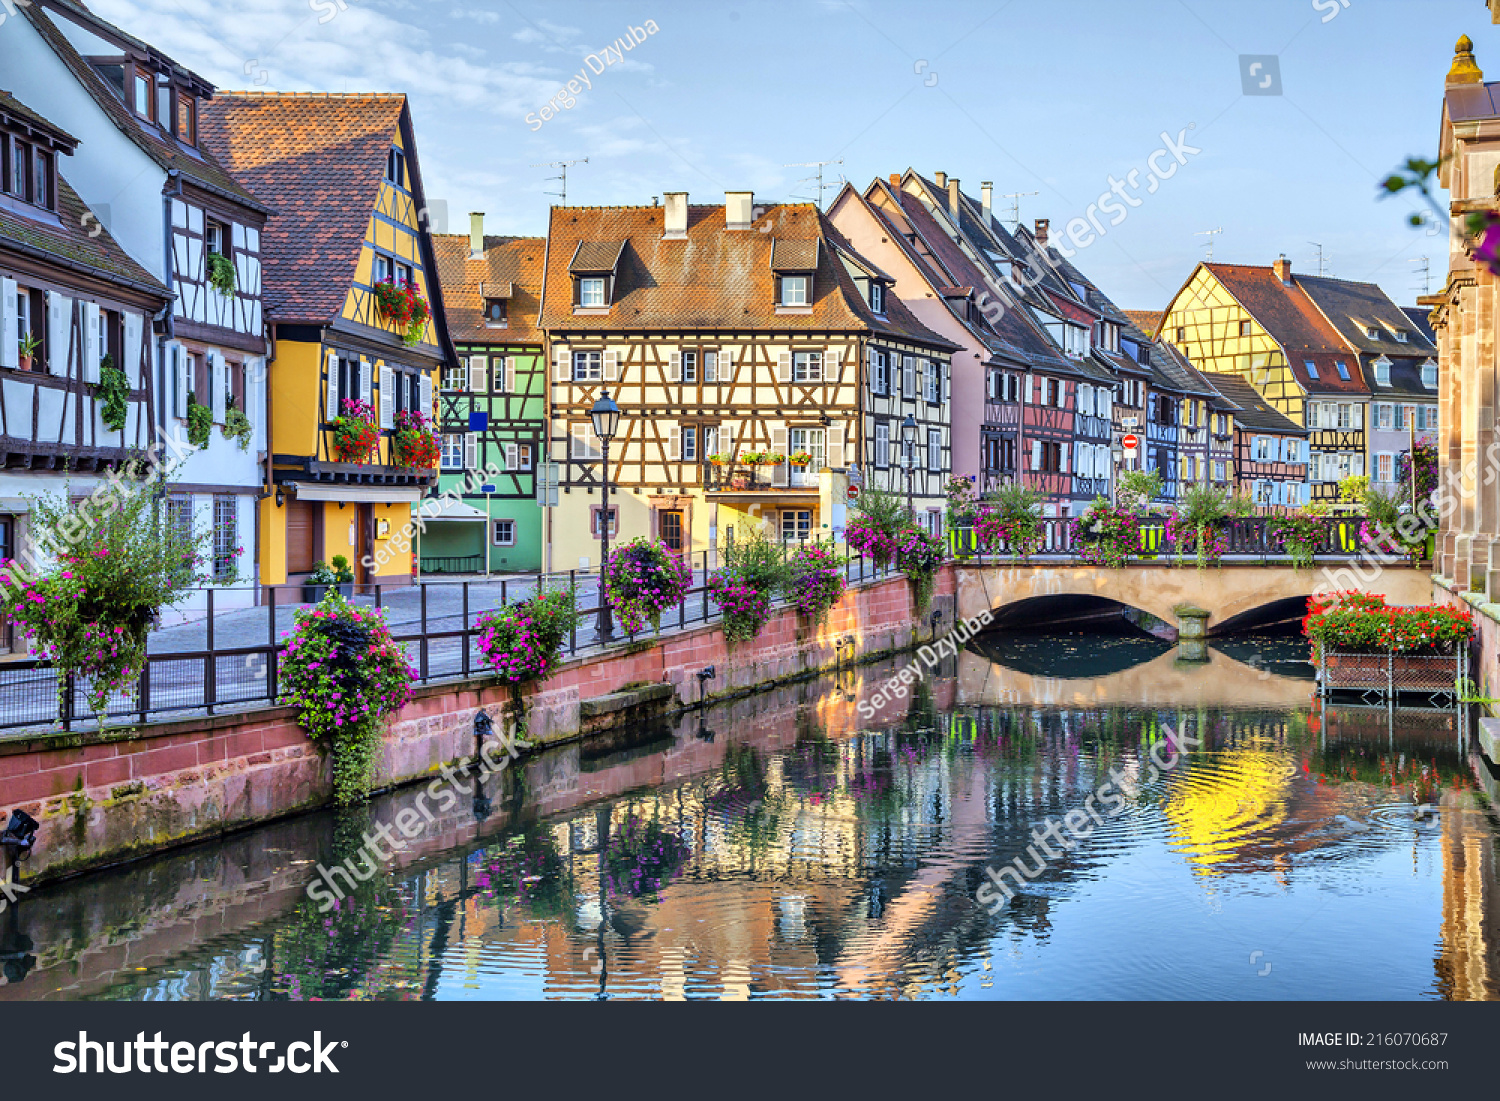 Colorful traditional french houses on the side of river Lauch in Petite Venise, Colmar, France #216070687